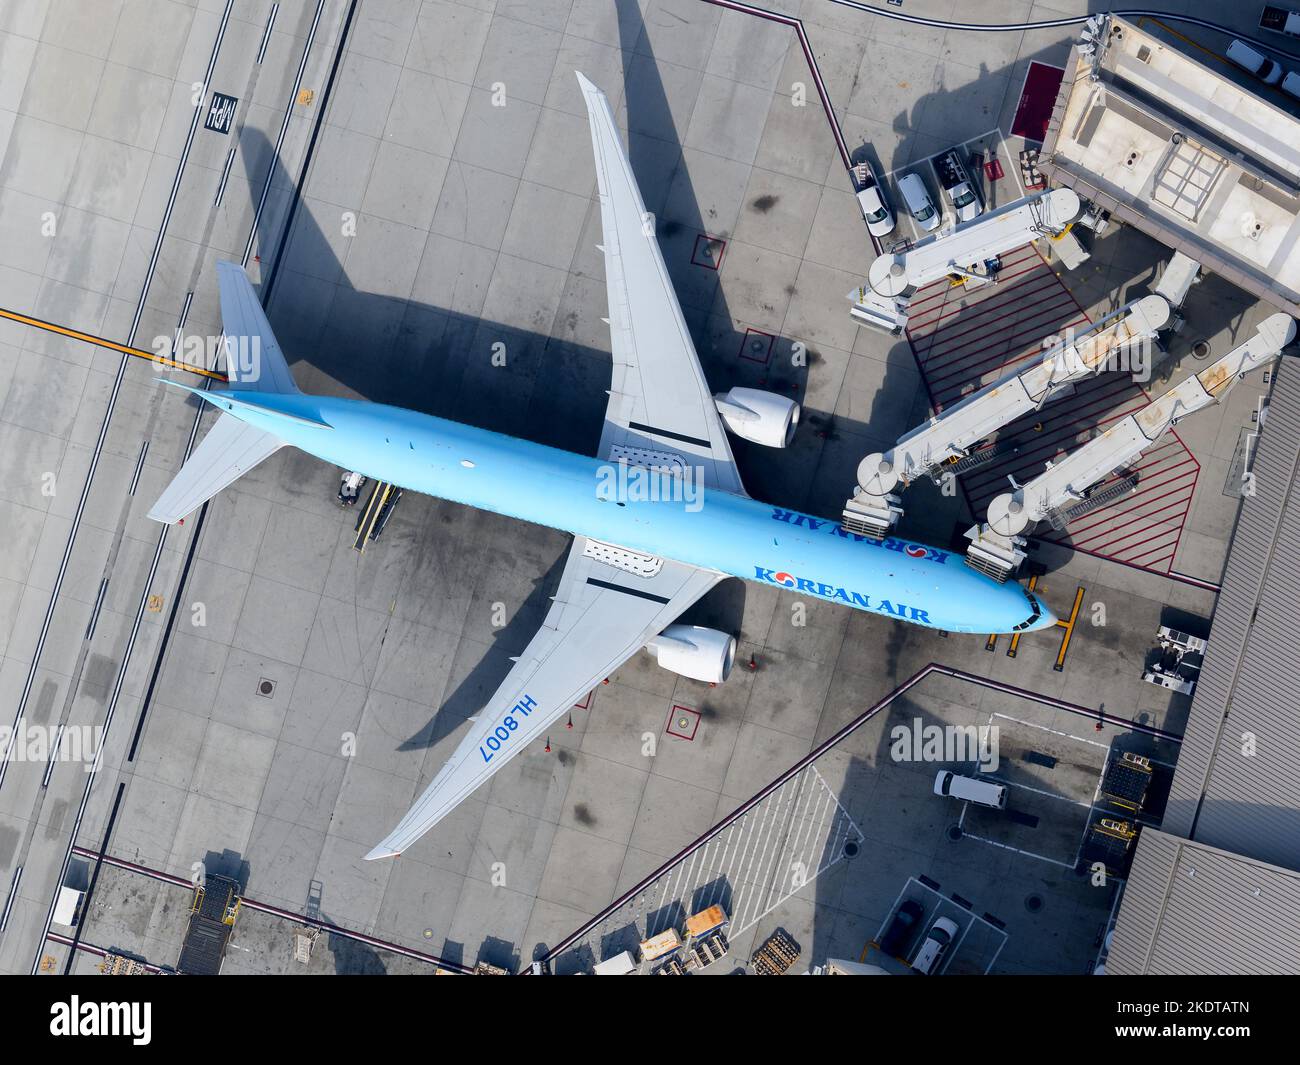 Korean Air Boeing 777 aircraft from above. Airplane 77W of Korean Air connected to boarding jet bridges. Plane 777-300ER of Korean Air HL8007. Stock Photo